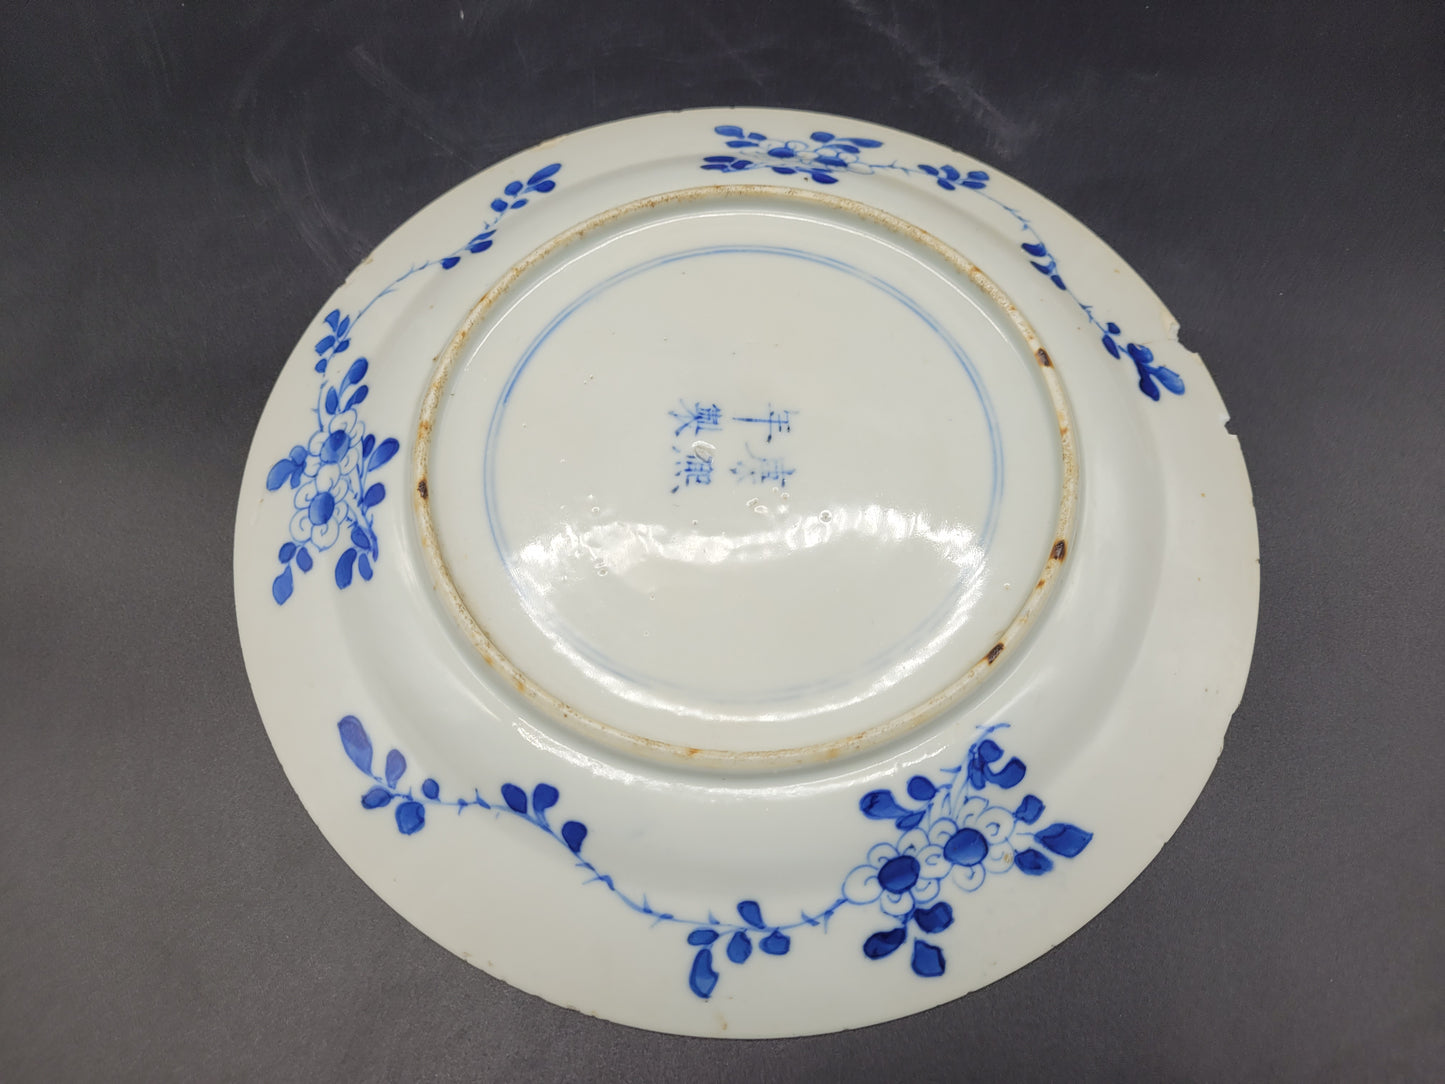 ANTIQUES AUCTIONS USA Beautiful Chinese Kangxi Period ( 1662-1722 ) Blue and White Dragon Plate 